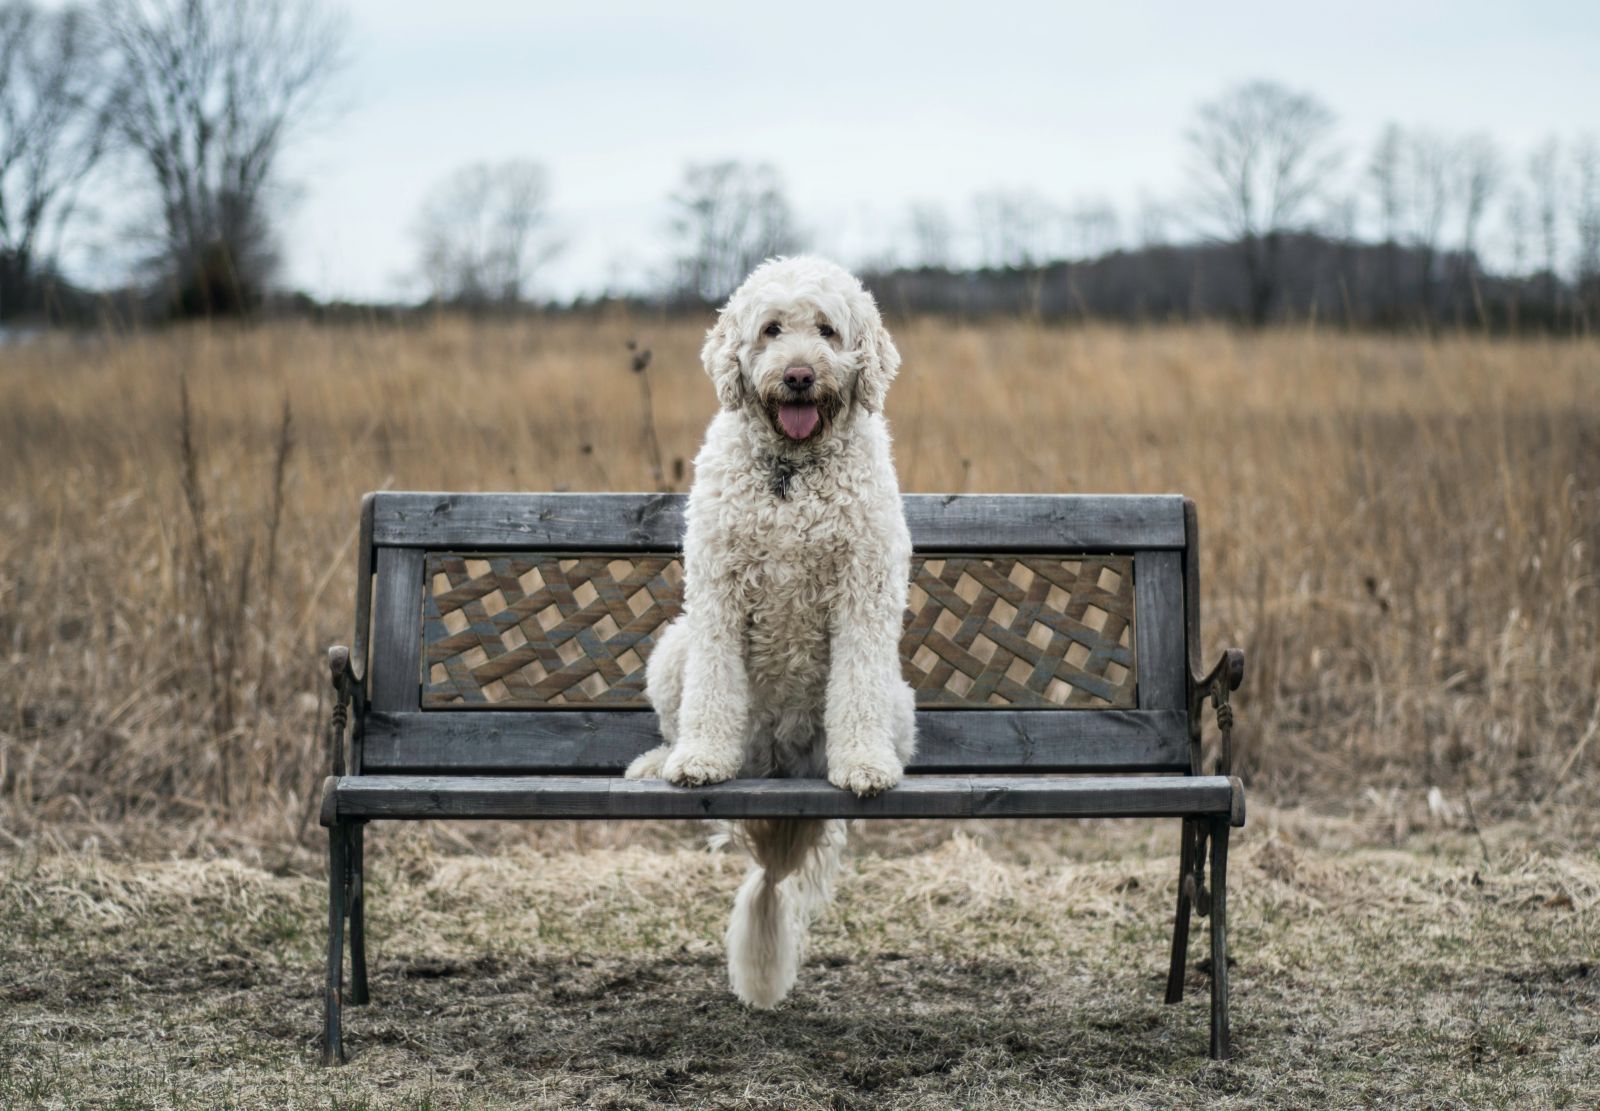 Dog on the bench